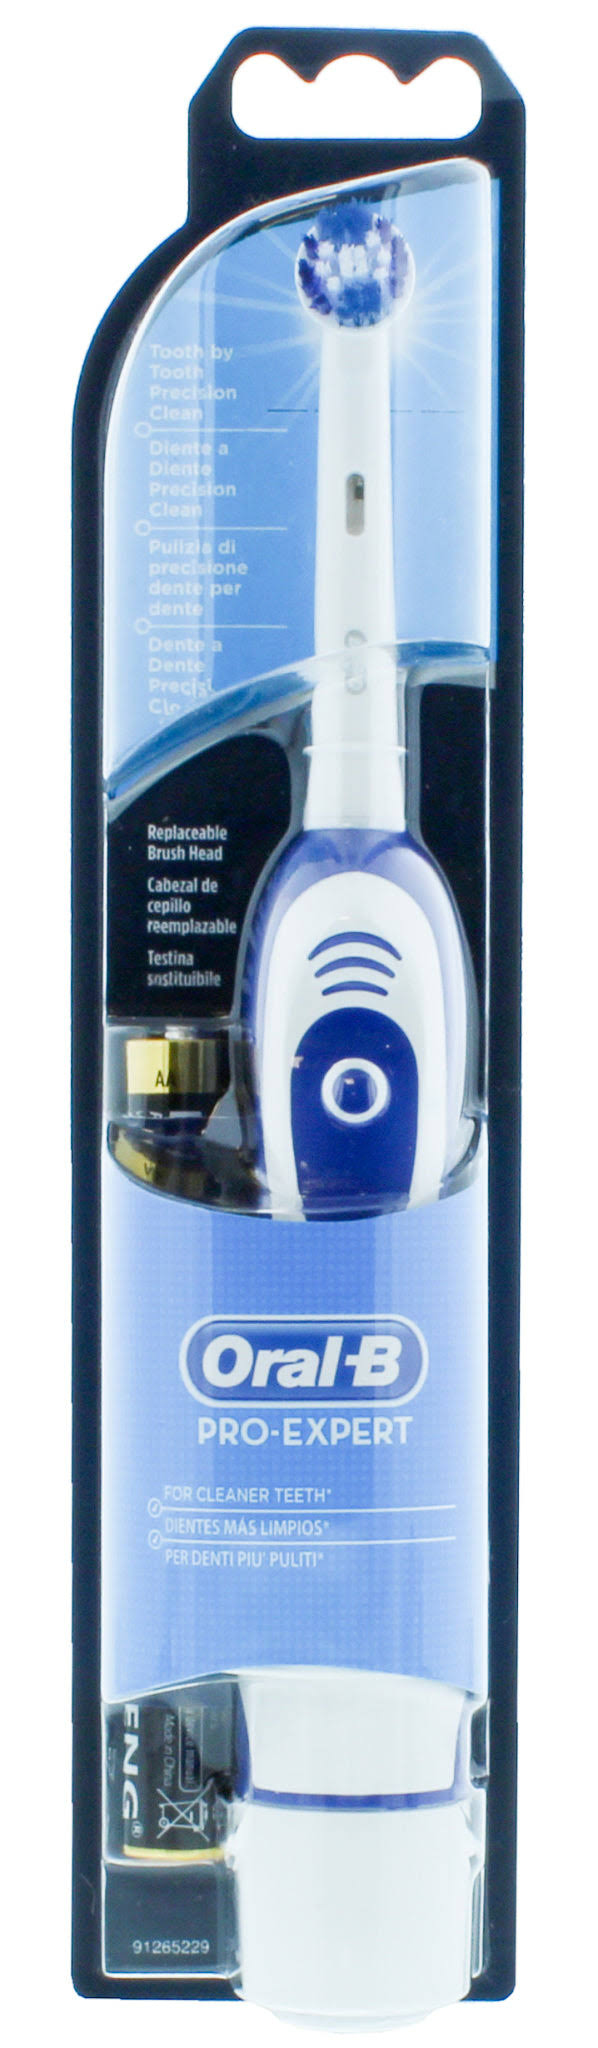 Oral B Pro Expert Battery Electric Toothbrush